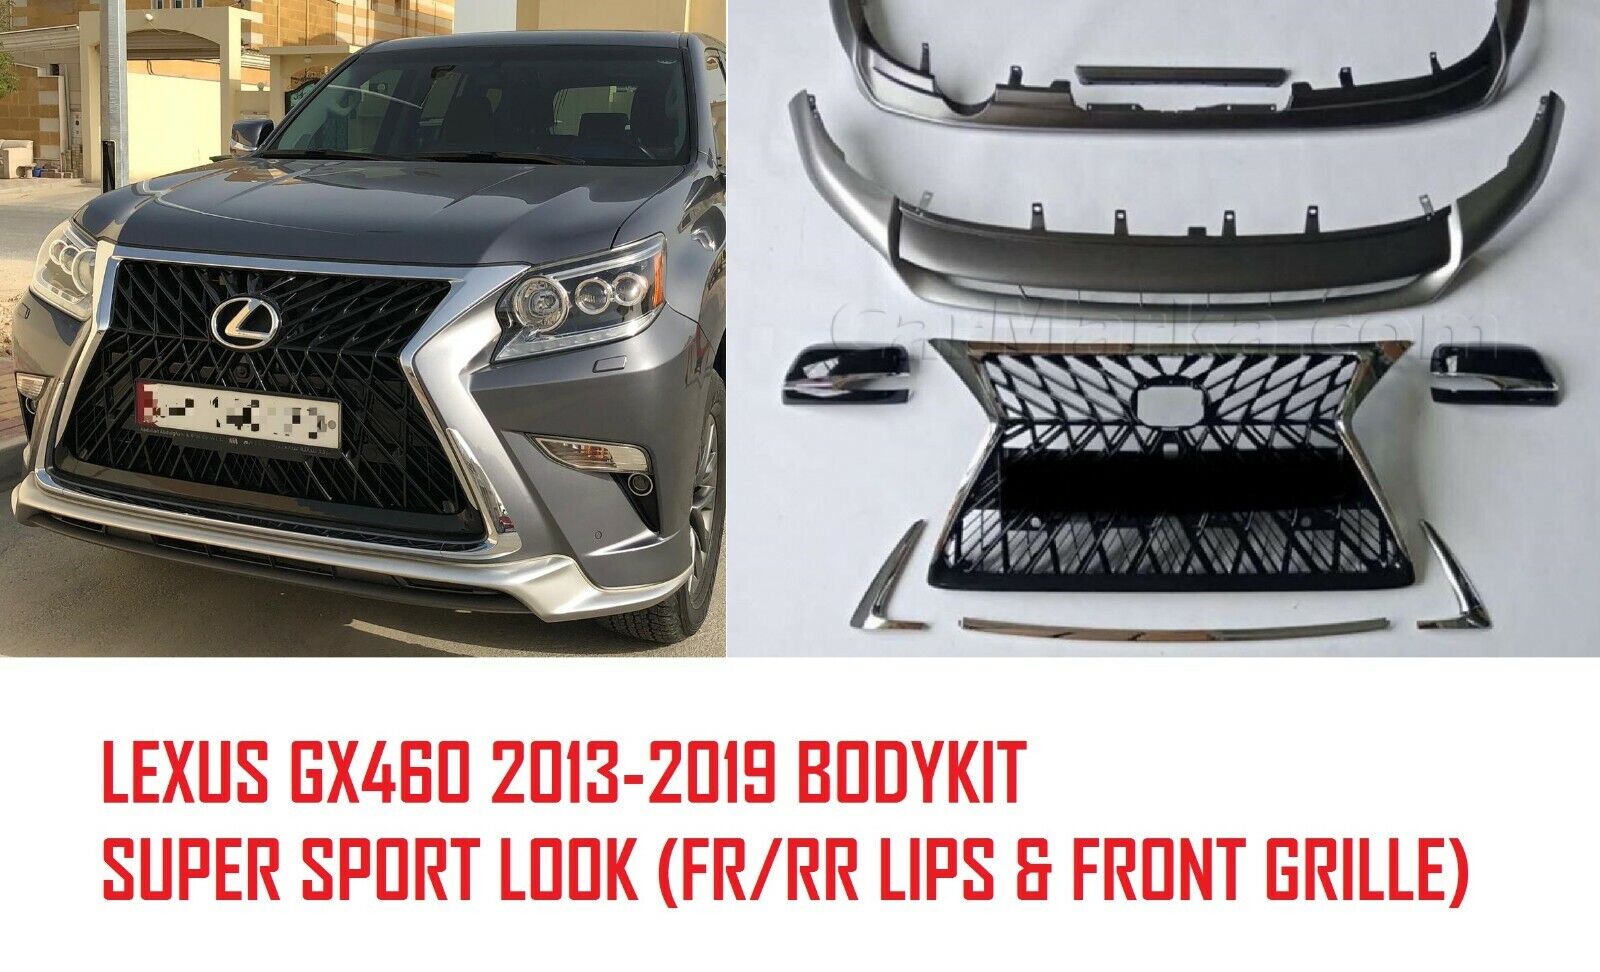 Super Sport Look Body Kit for Lexus GX460 2013-2019 PAINTED